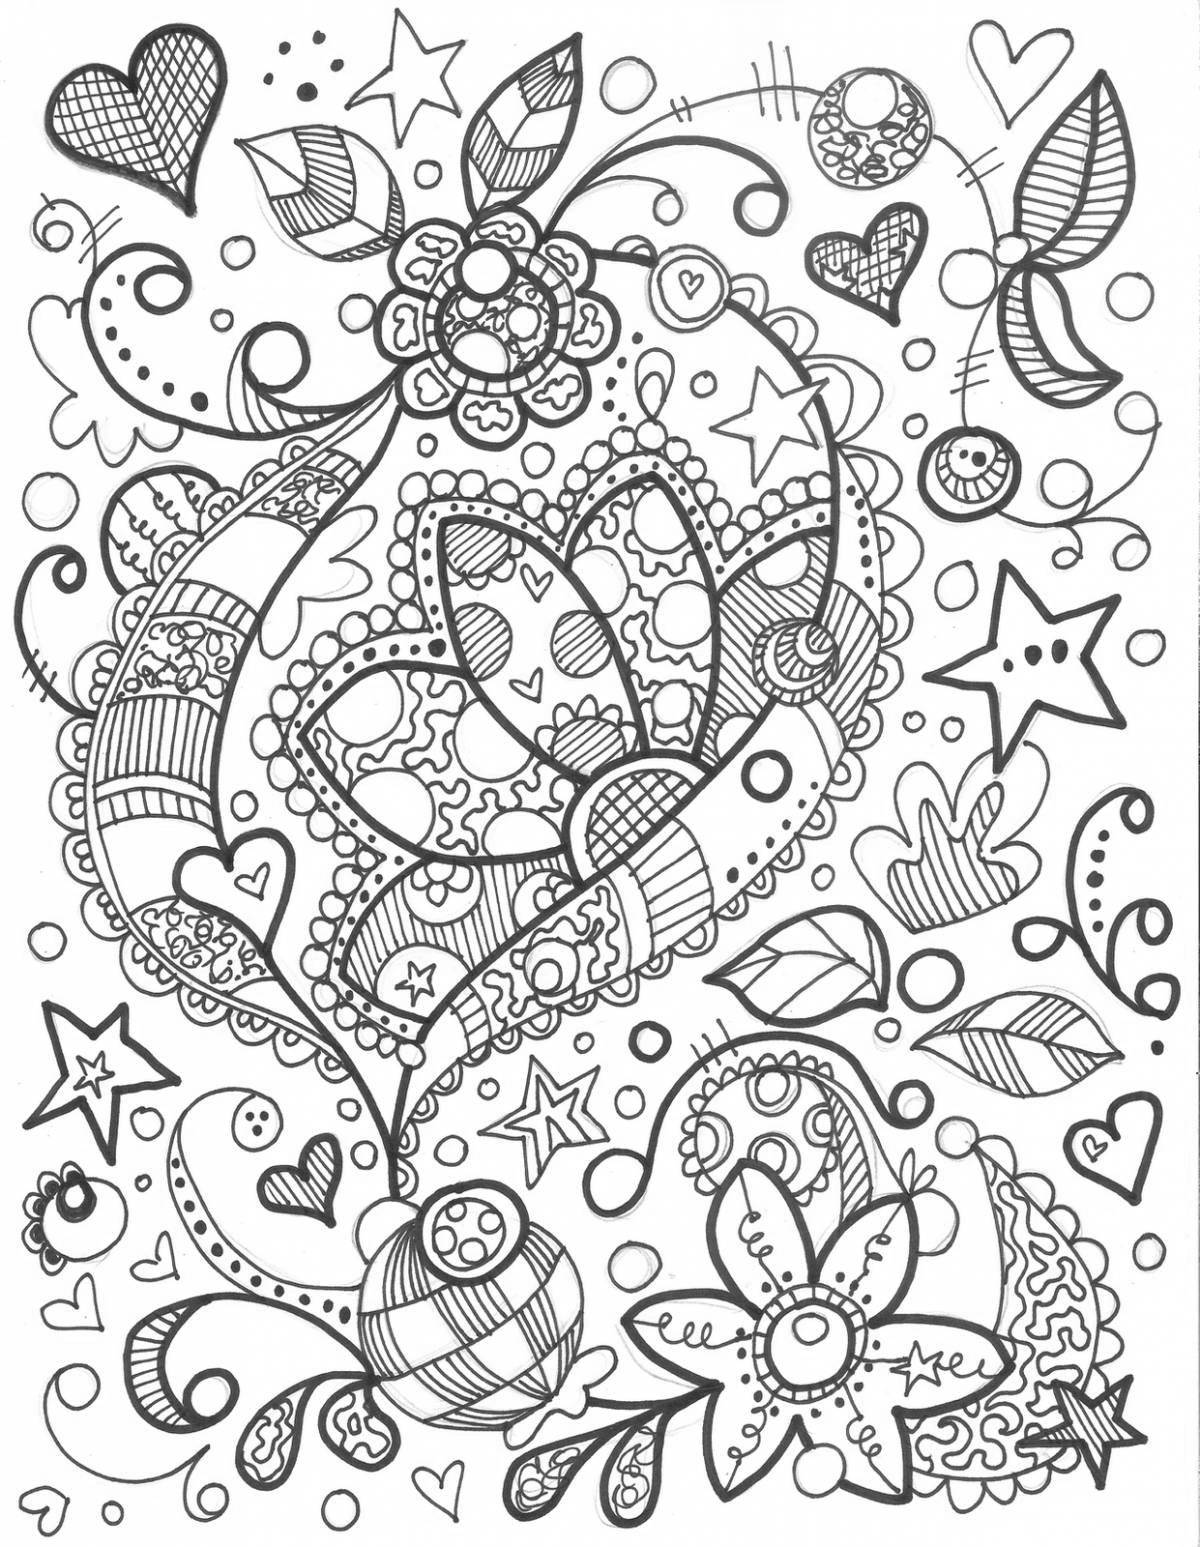 Letter eater antistress coloring book